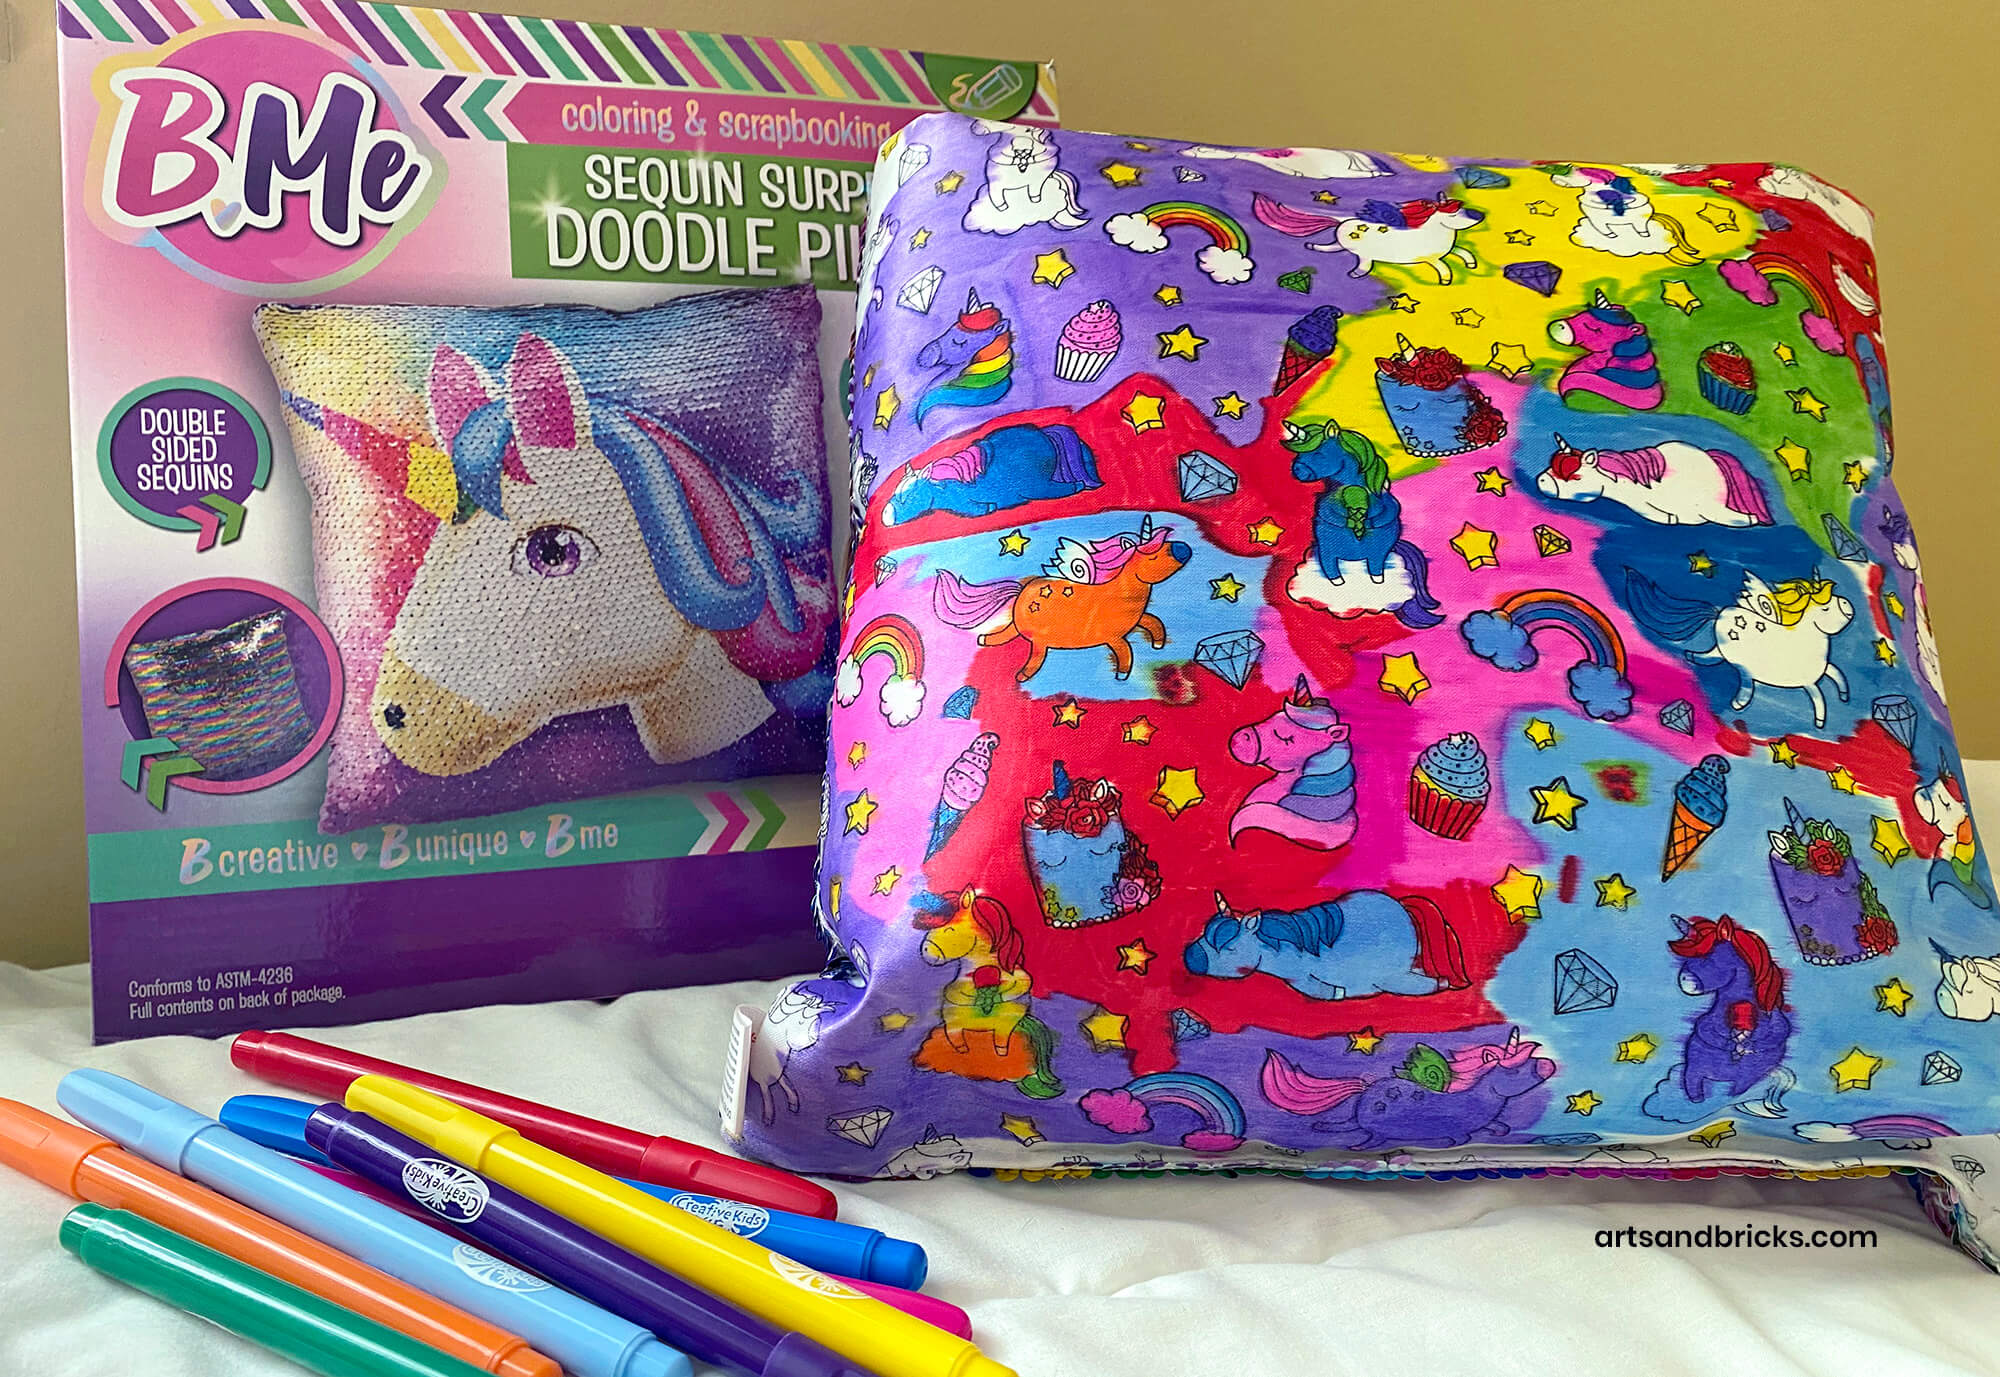 BMe Sequin Surprise Doodle Pillow with bright-colored fabric markers